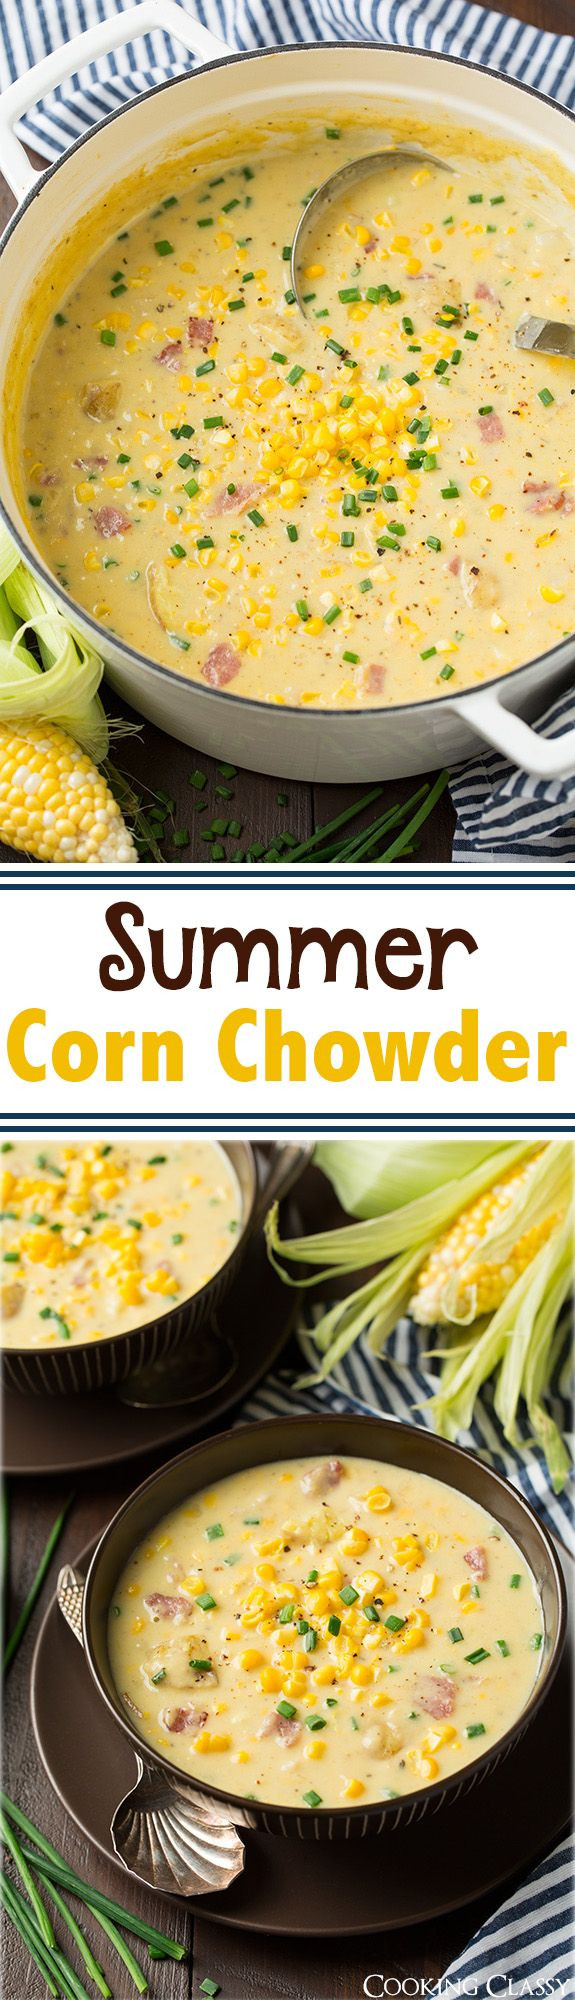 Summer Corn Chowder Recipe
 1000 images about Great recipes Do Overs on Pinterest